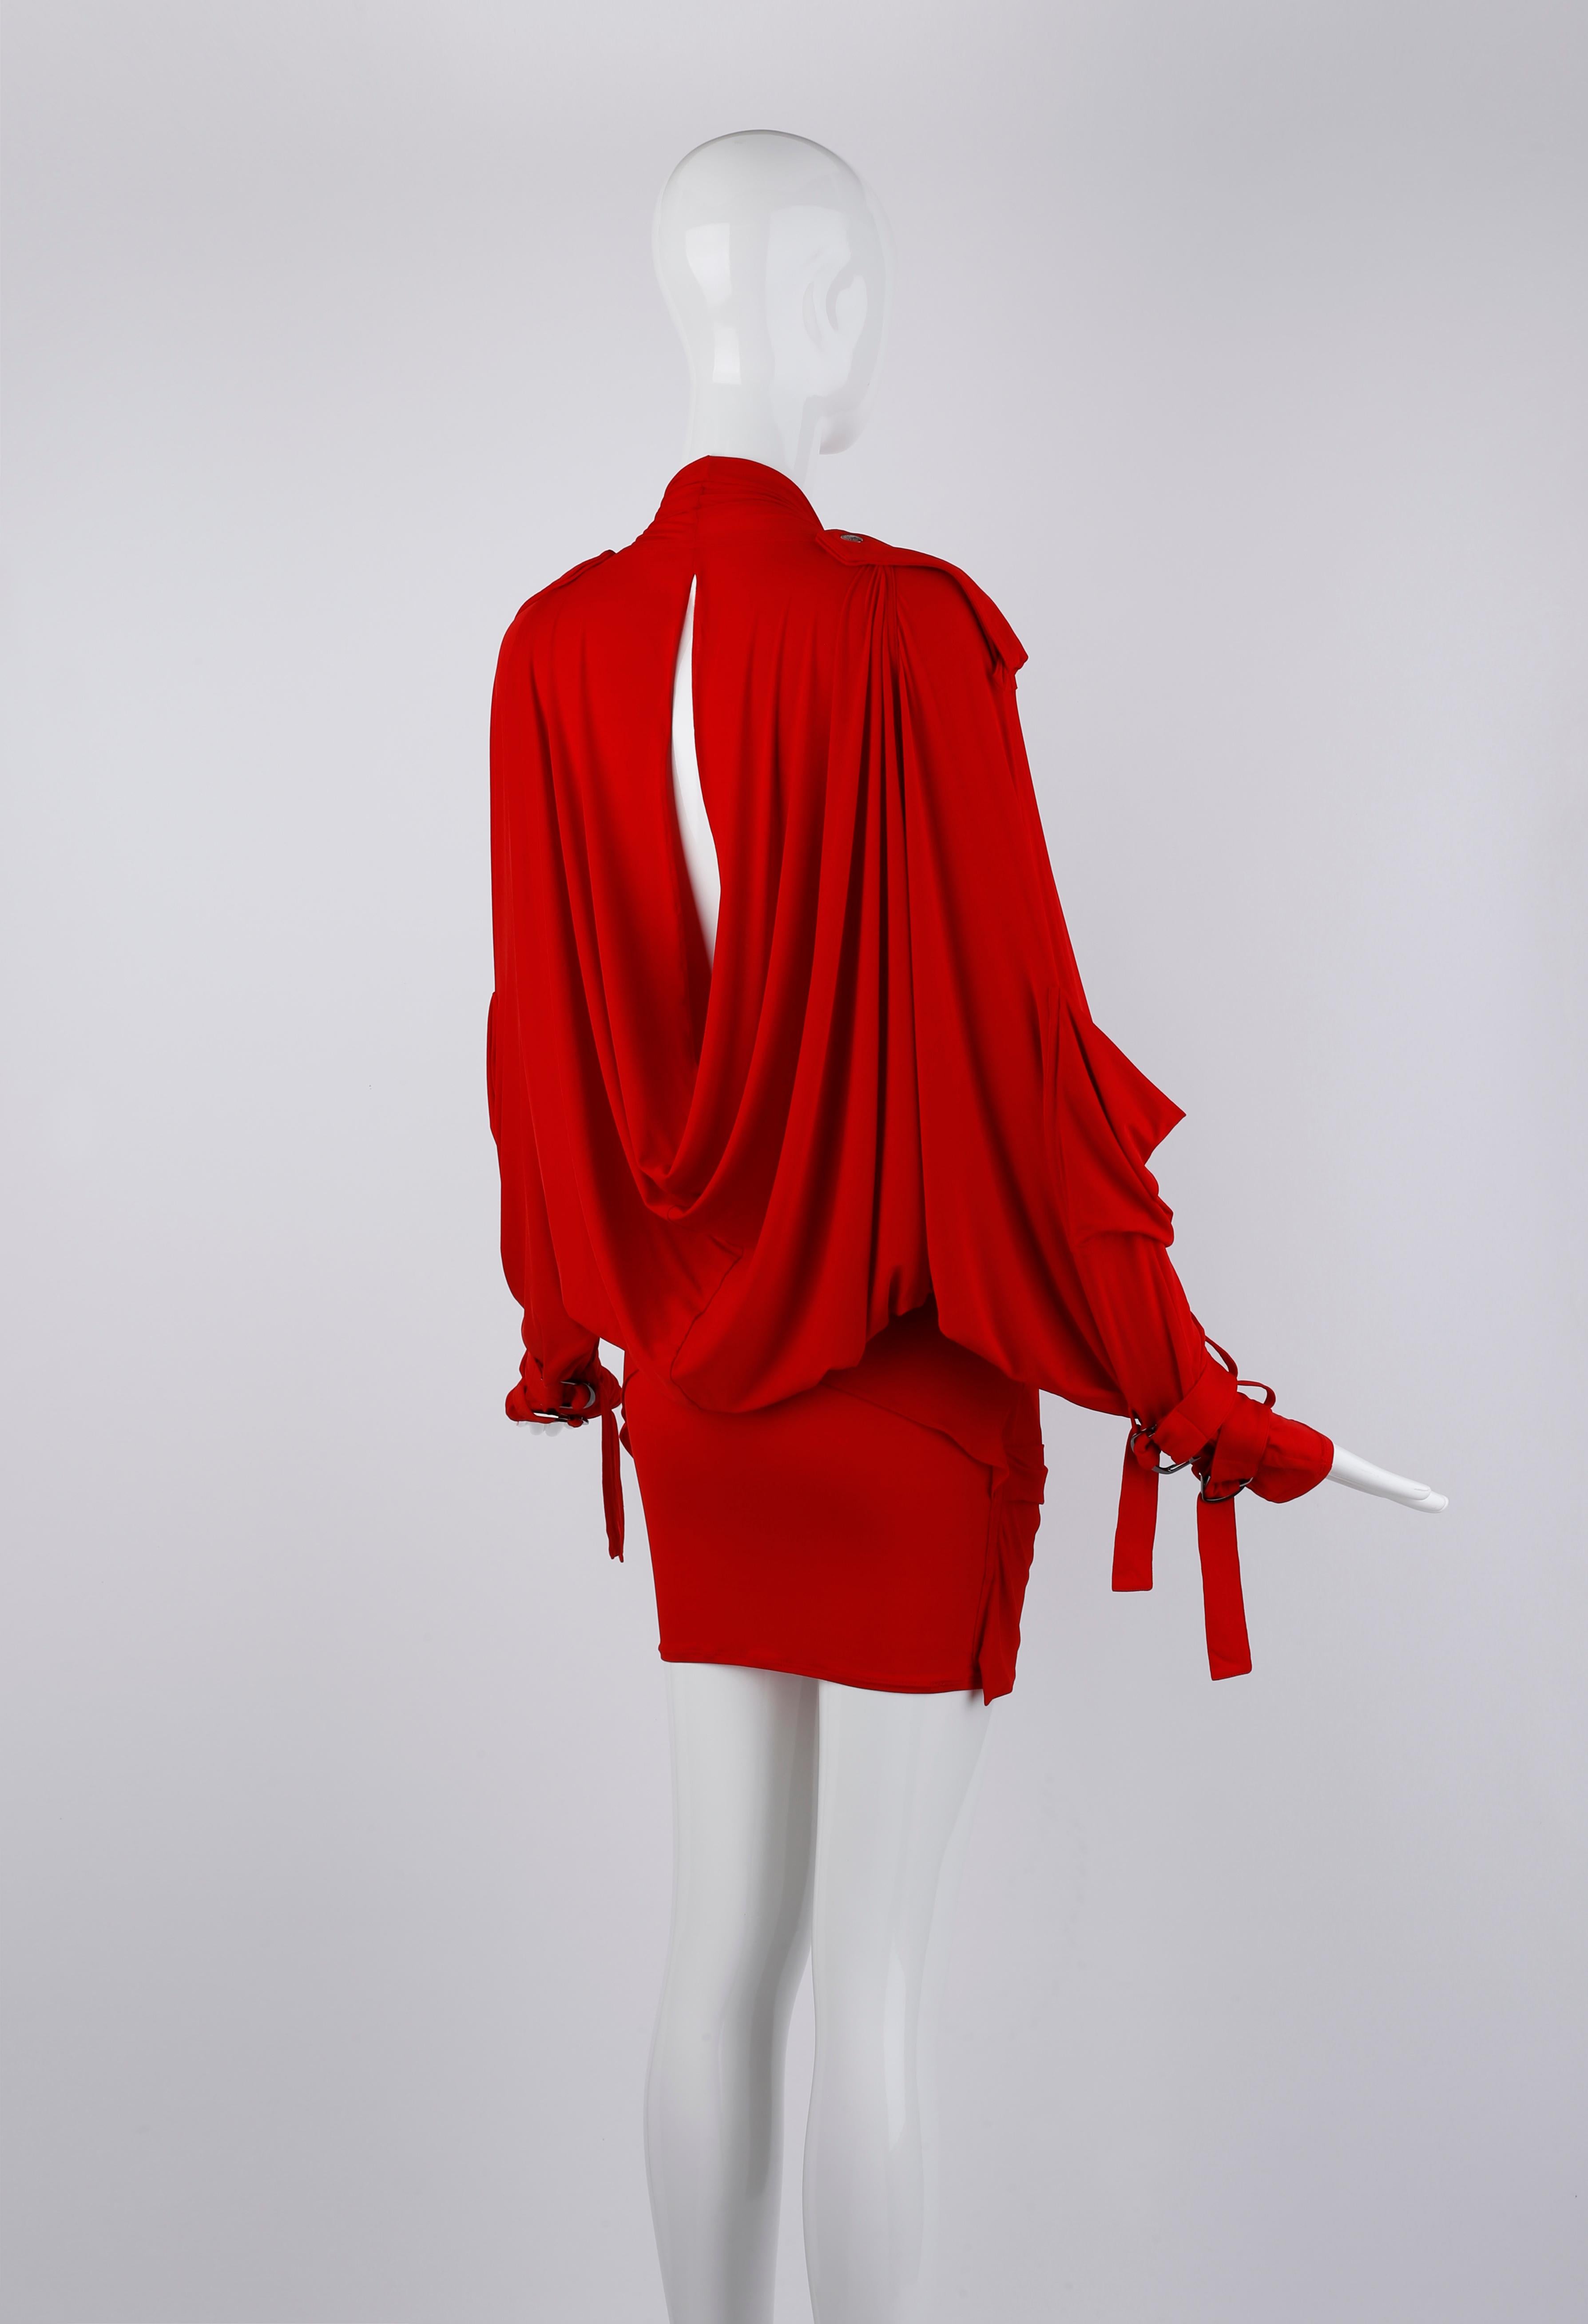 Christian Dior John Galliano S/S 2003 Red Plunge Draped Pocket Mini Dress In Good Condition For Sale In Chicago, IL